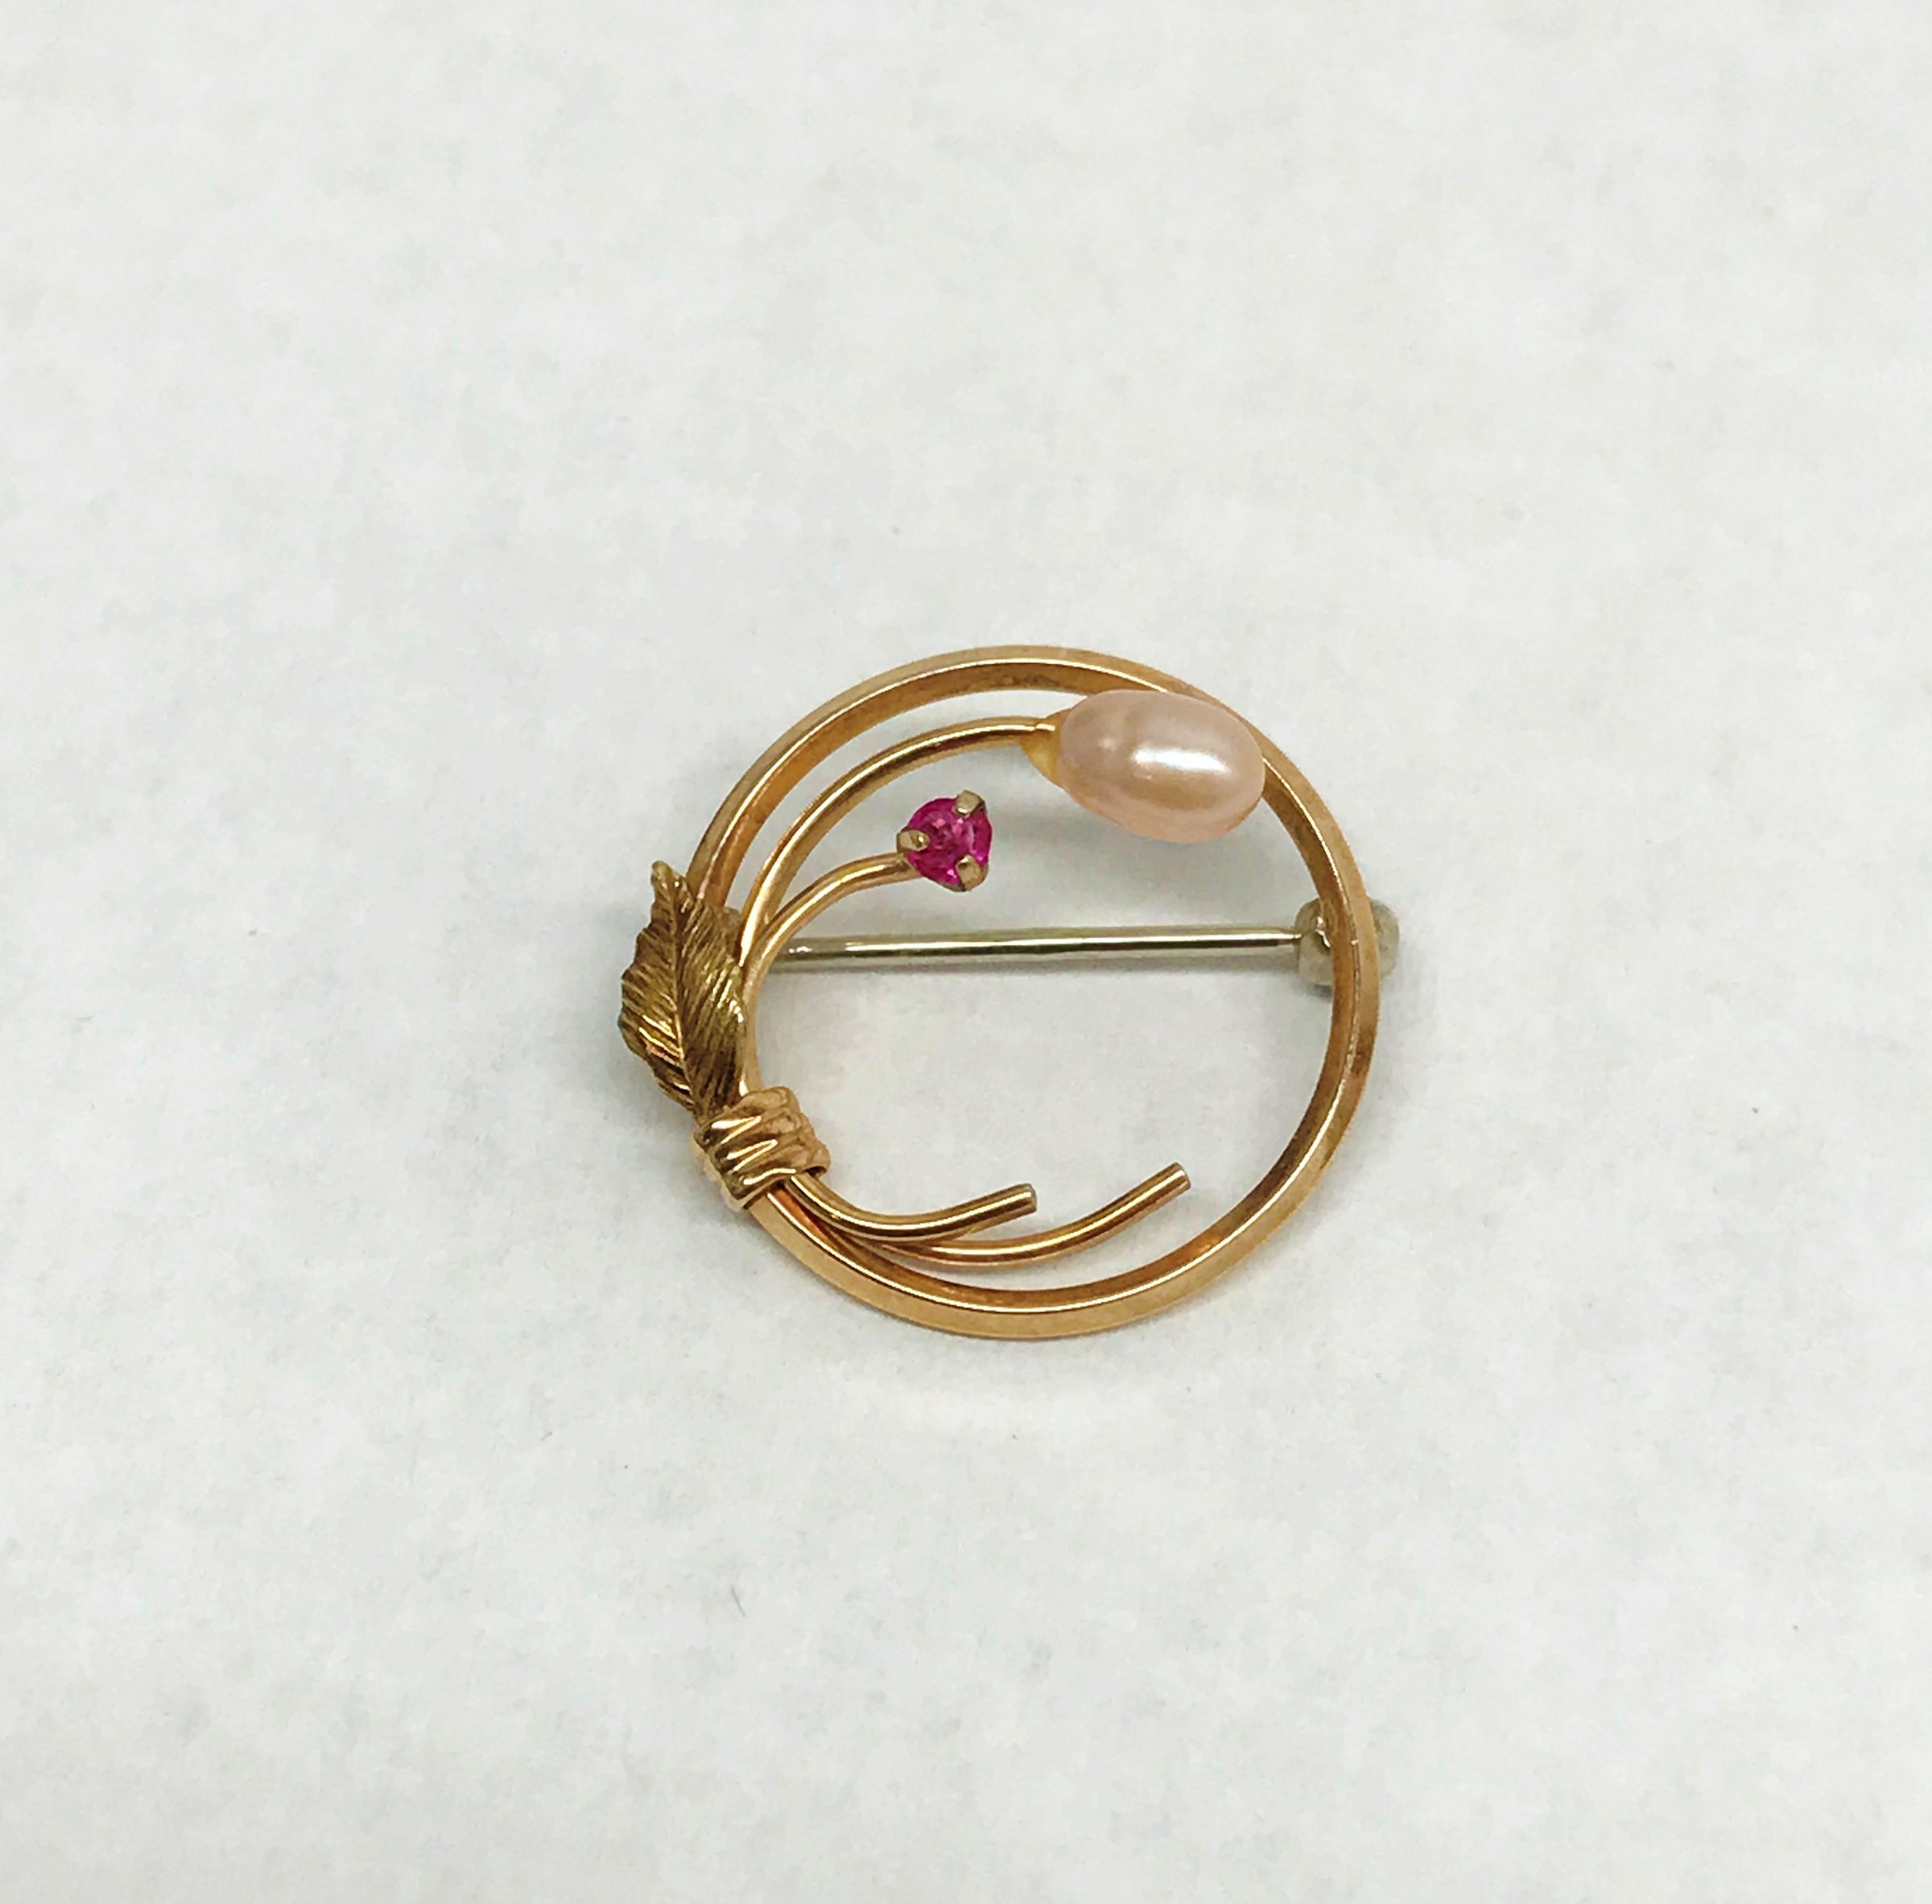 www.hersandhistreasures.com/products/krementz-gold-tone-round-brooch-pin-with-genuine-ruby-and-pearl